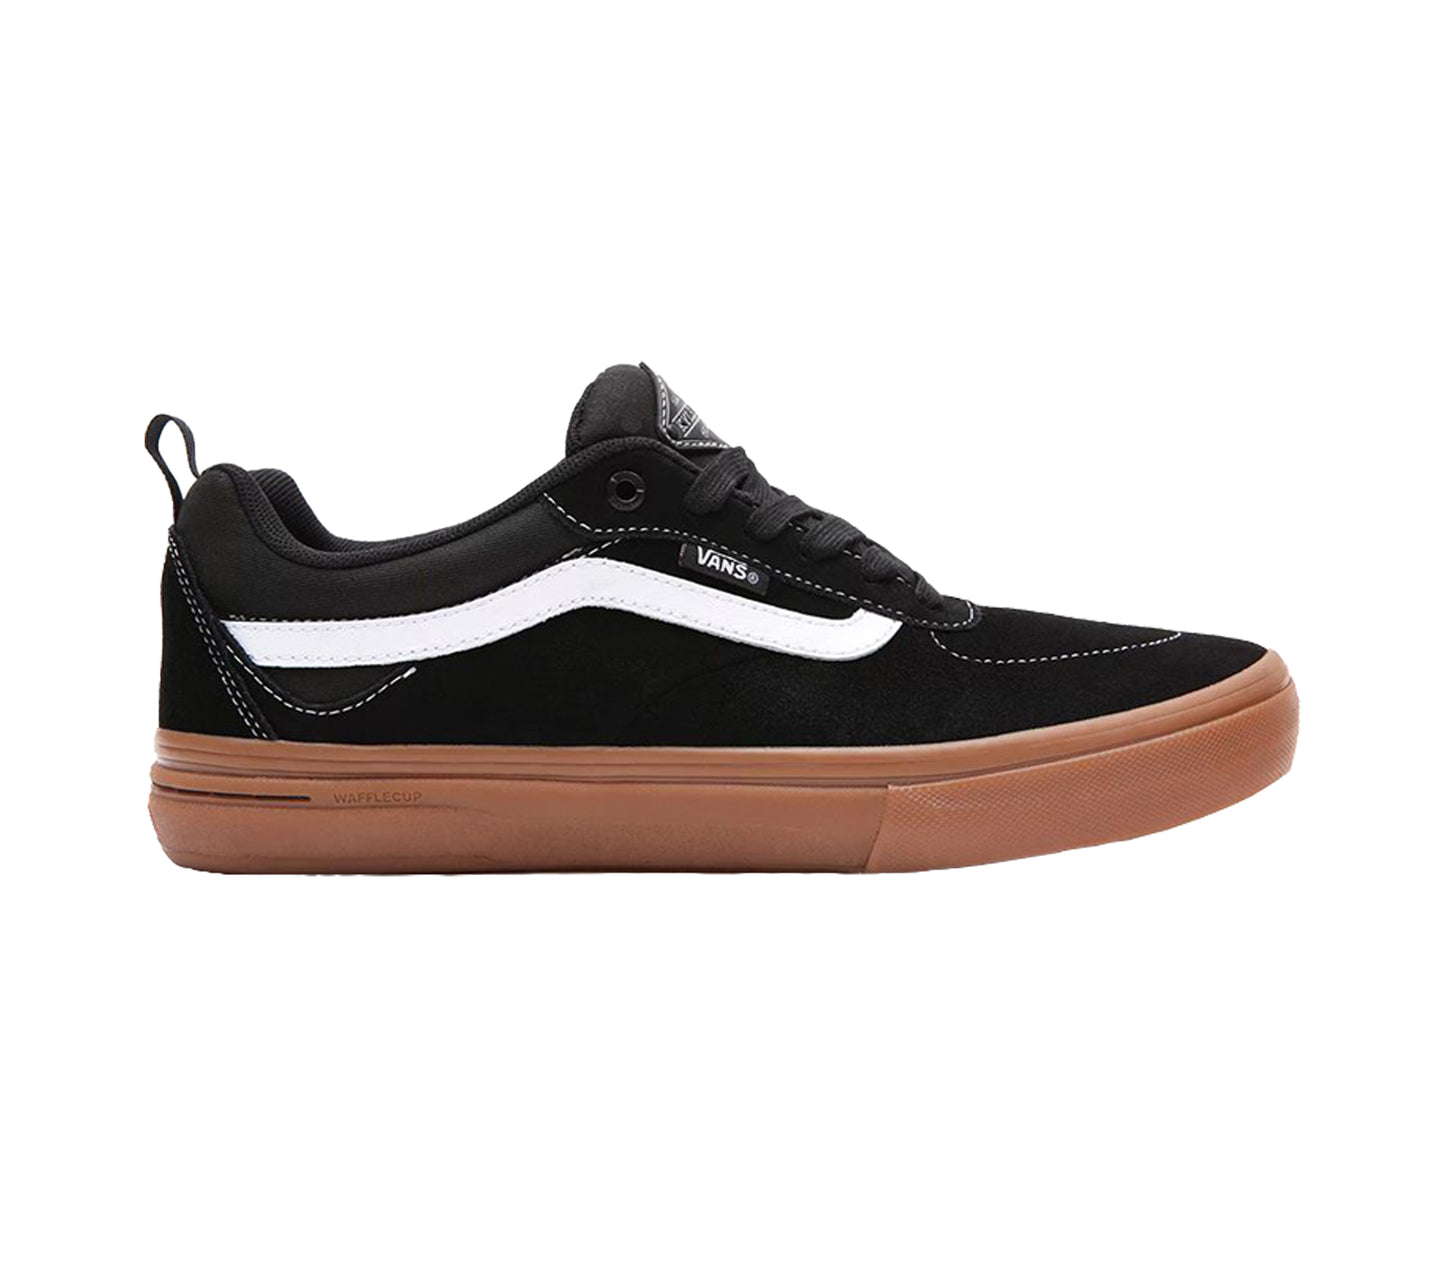 Vans Kyle Walker Pro skate shoe side view. Black low cut shoe, with white stitching, white vans stripe and gum coloured waffle cut sole. 